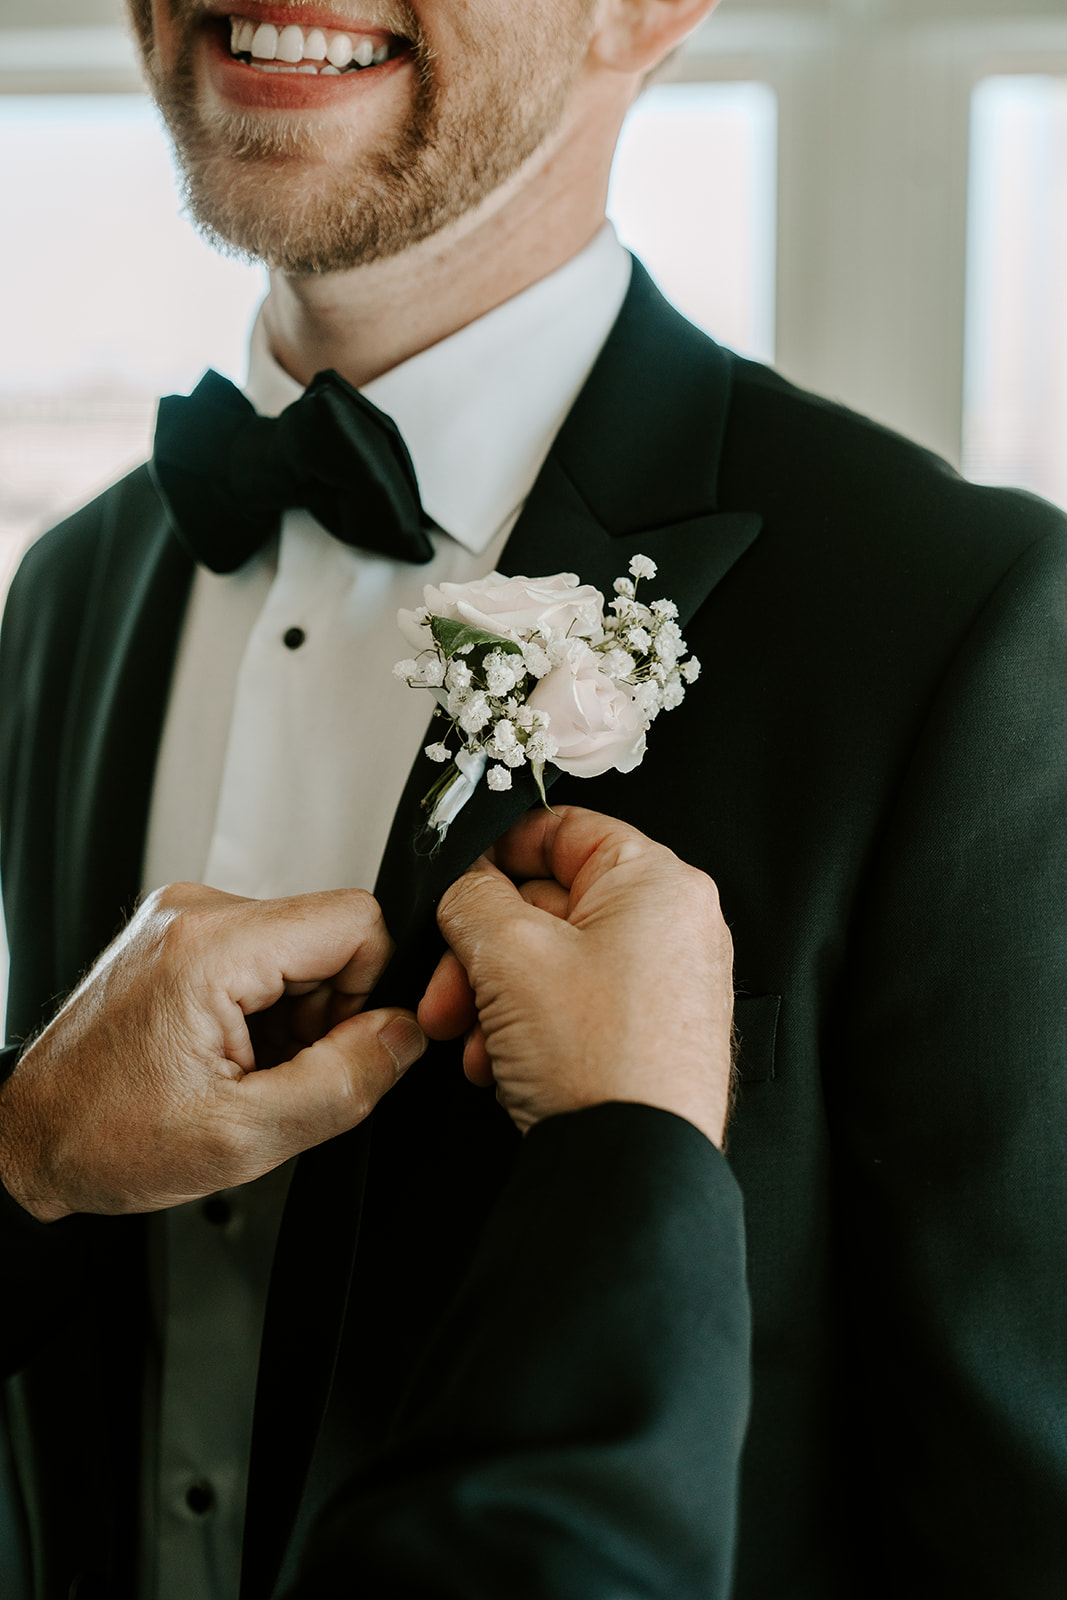 Handsome groom adds final touches to get ready for his dreamy Boston wedding day